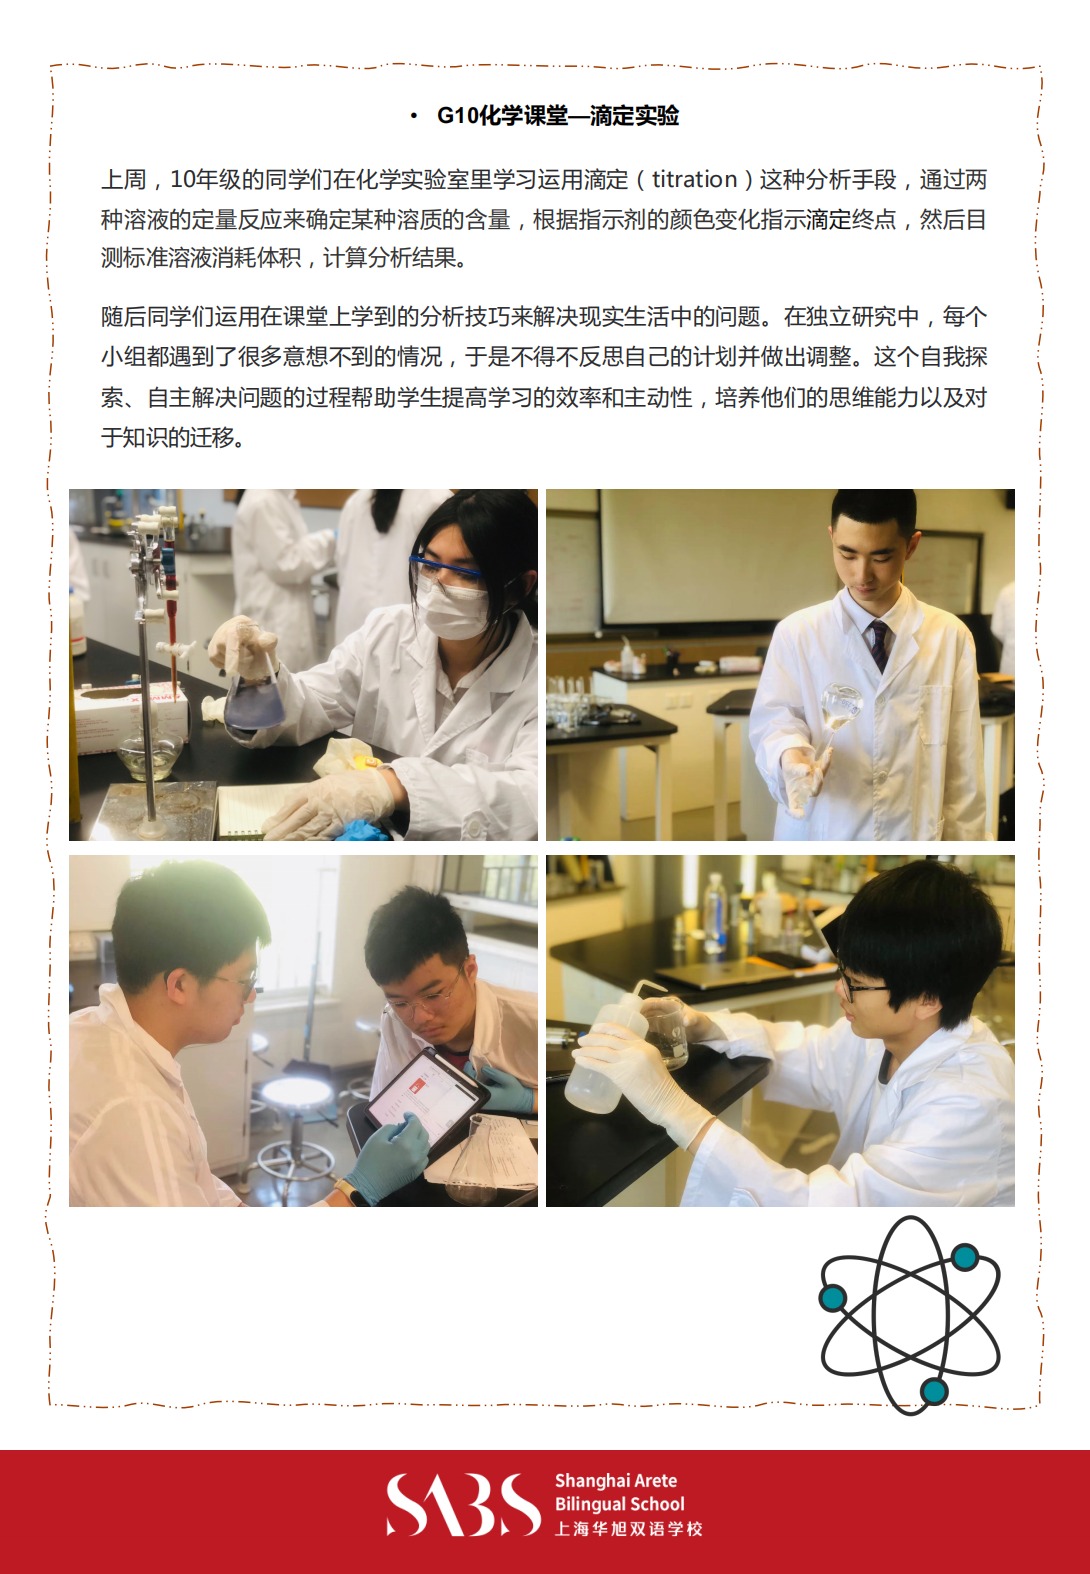 HS 7th Issue Newsletter pptx（Chinese）_06.png